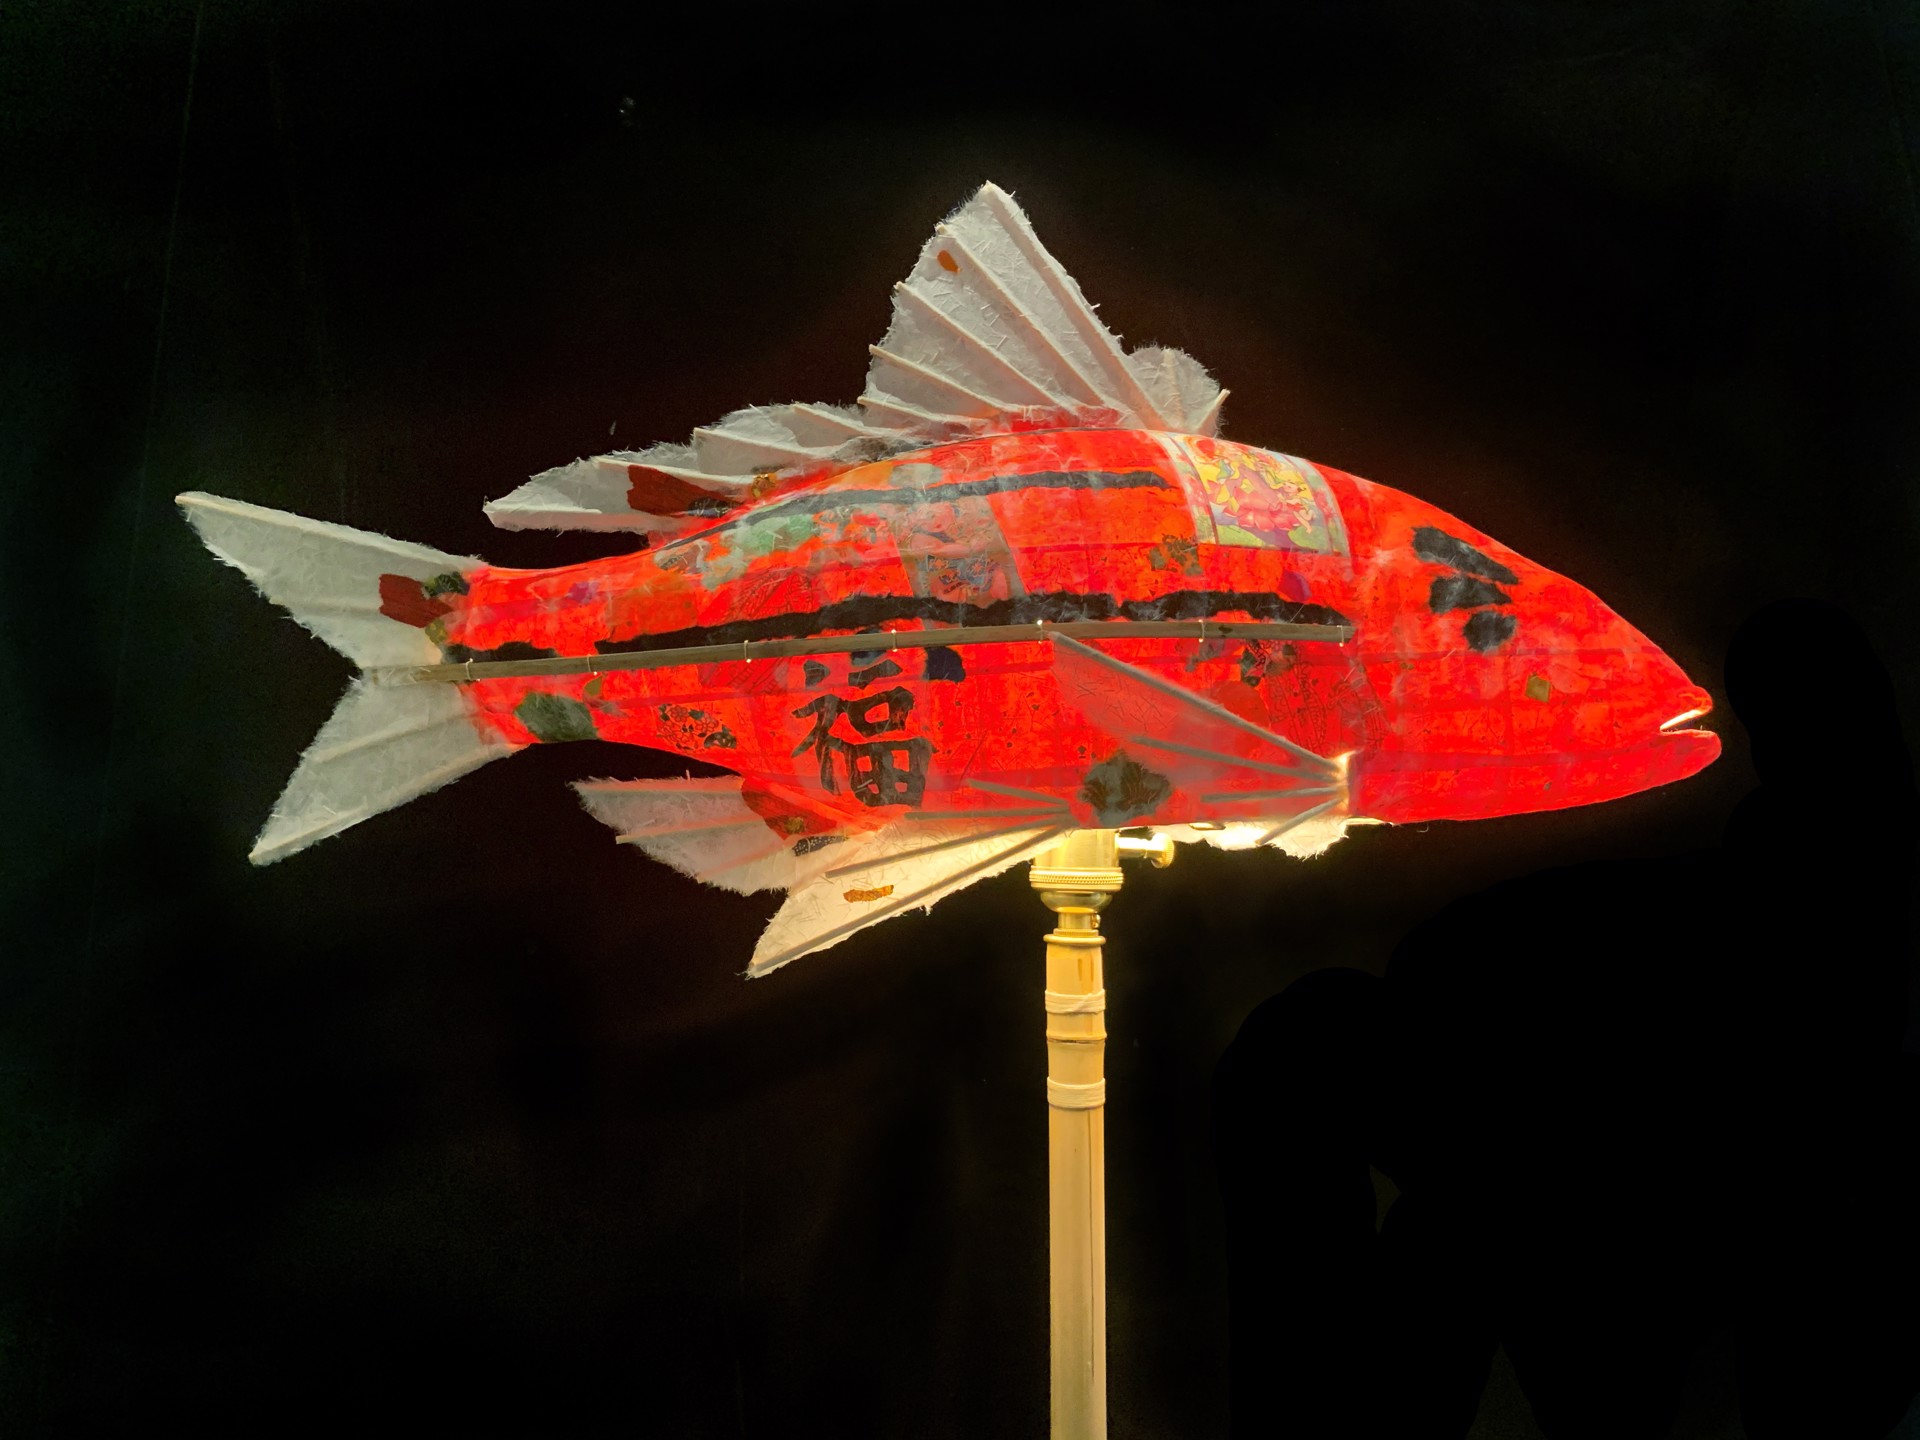 Red Striped Bass commission for Larry & Kathy (deposit) by Elaine Hanowell